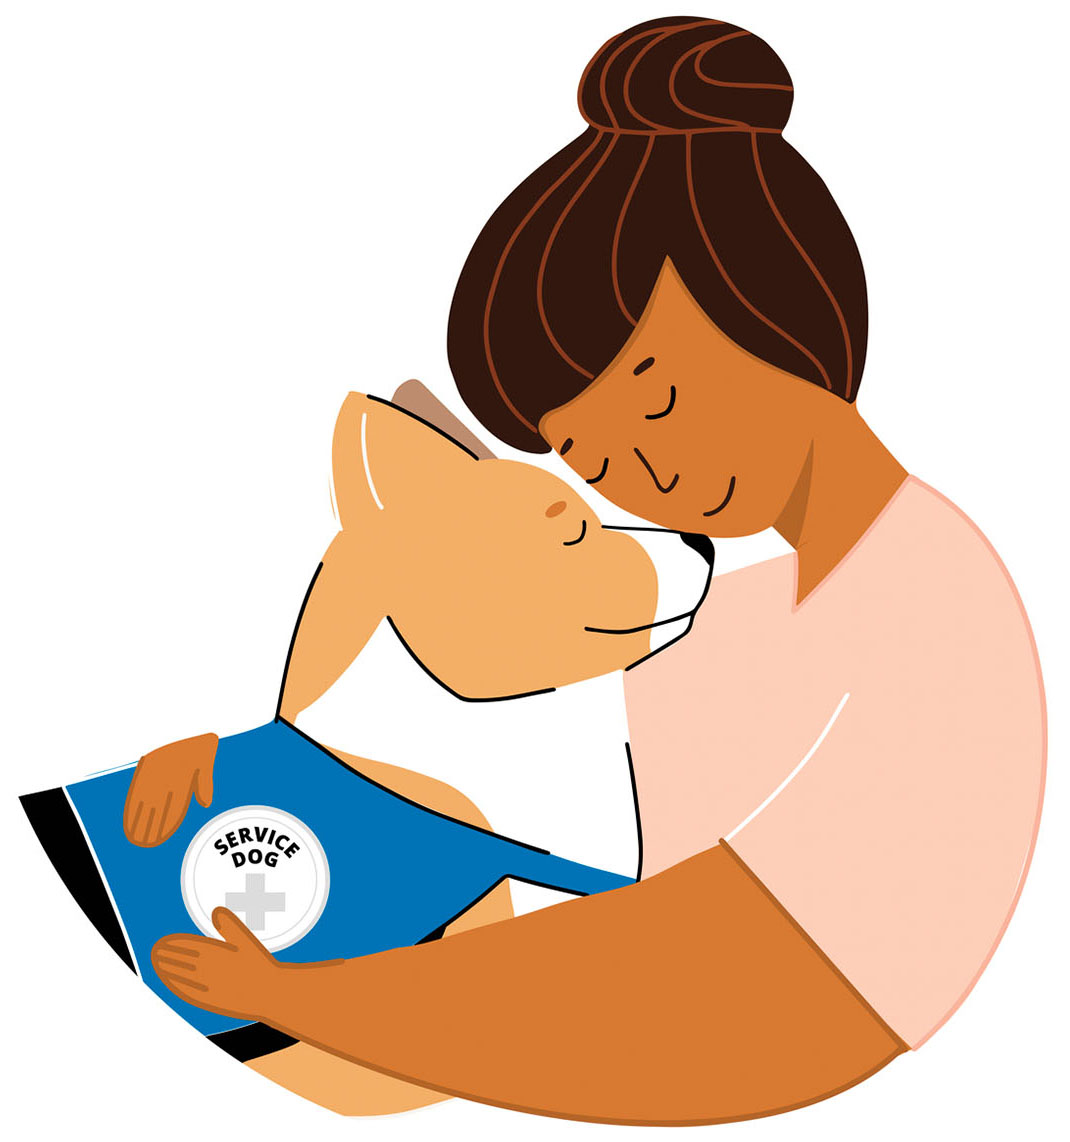 An illustration of a woman and a service animal